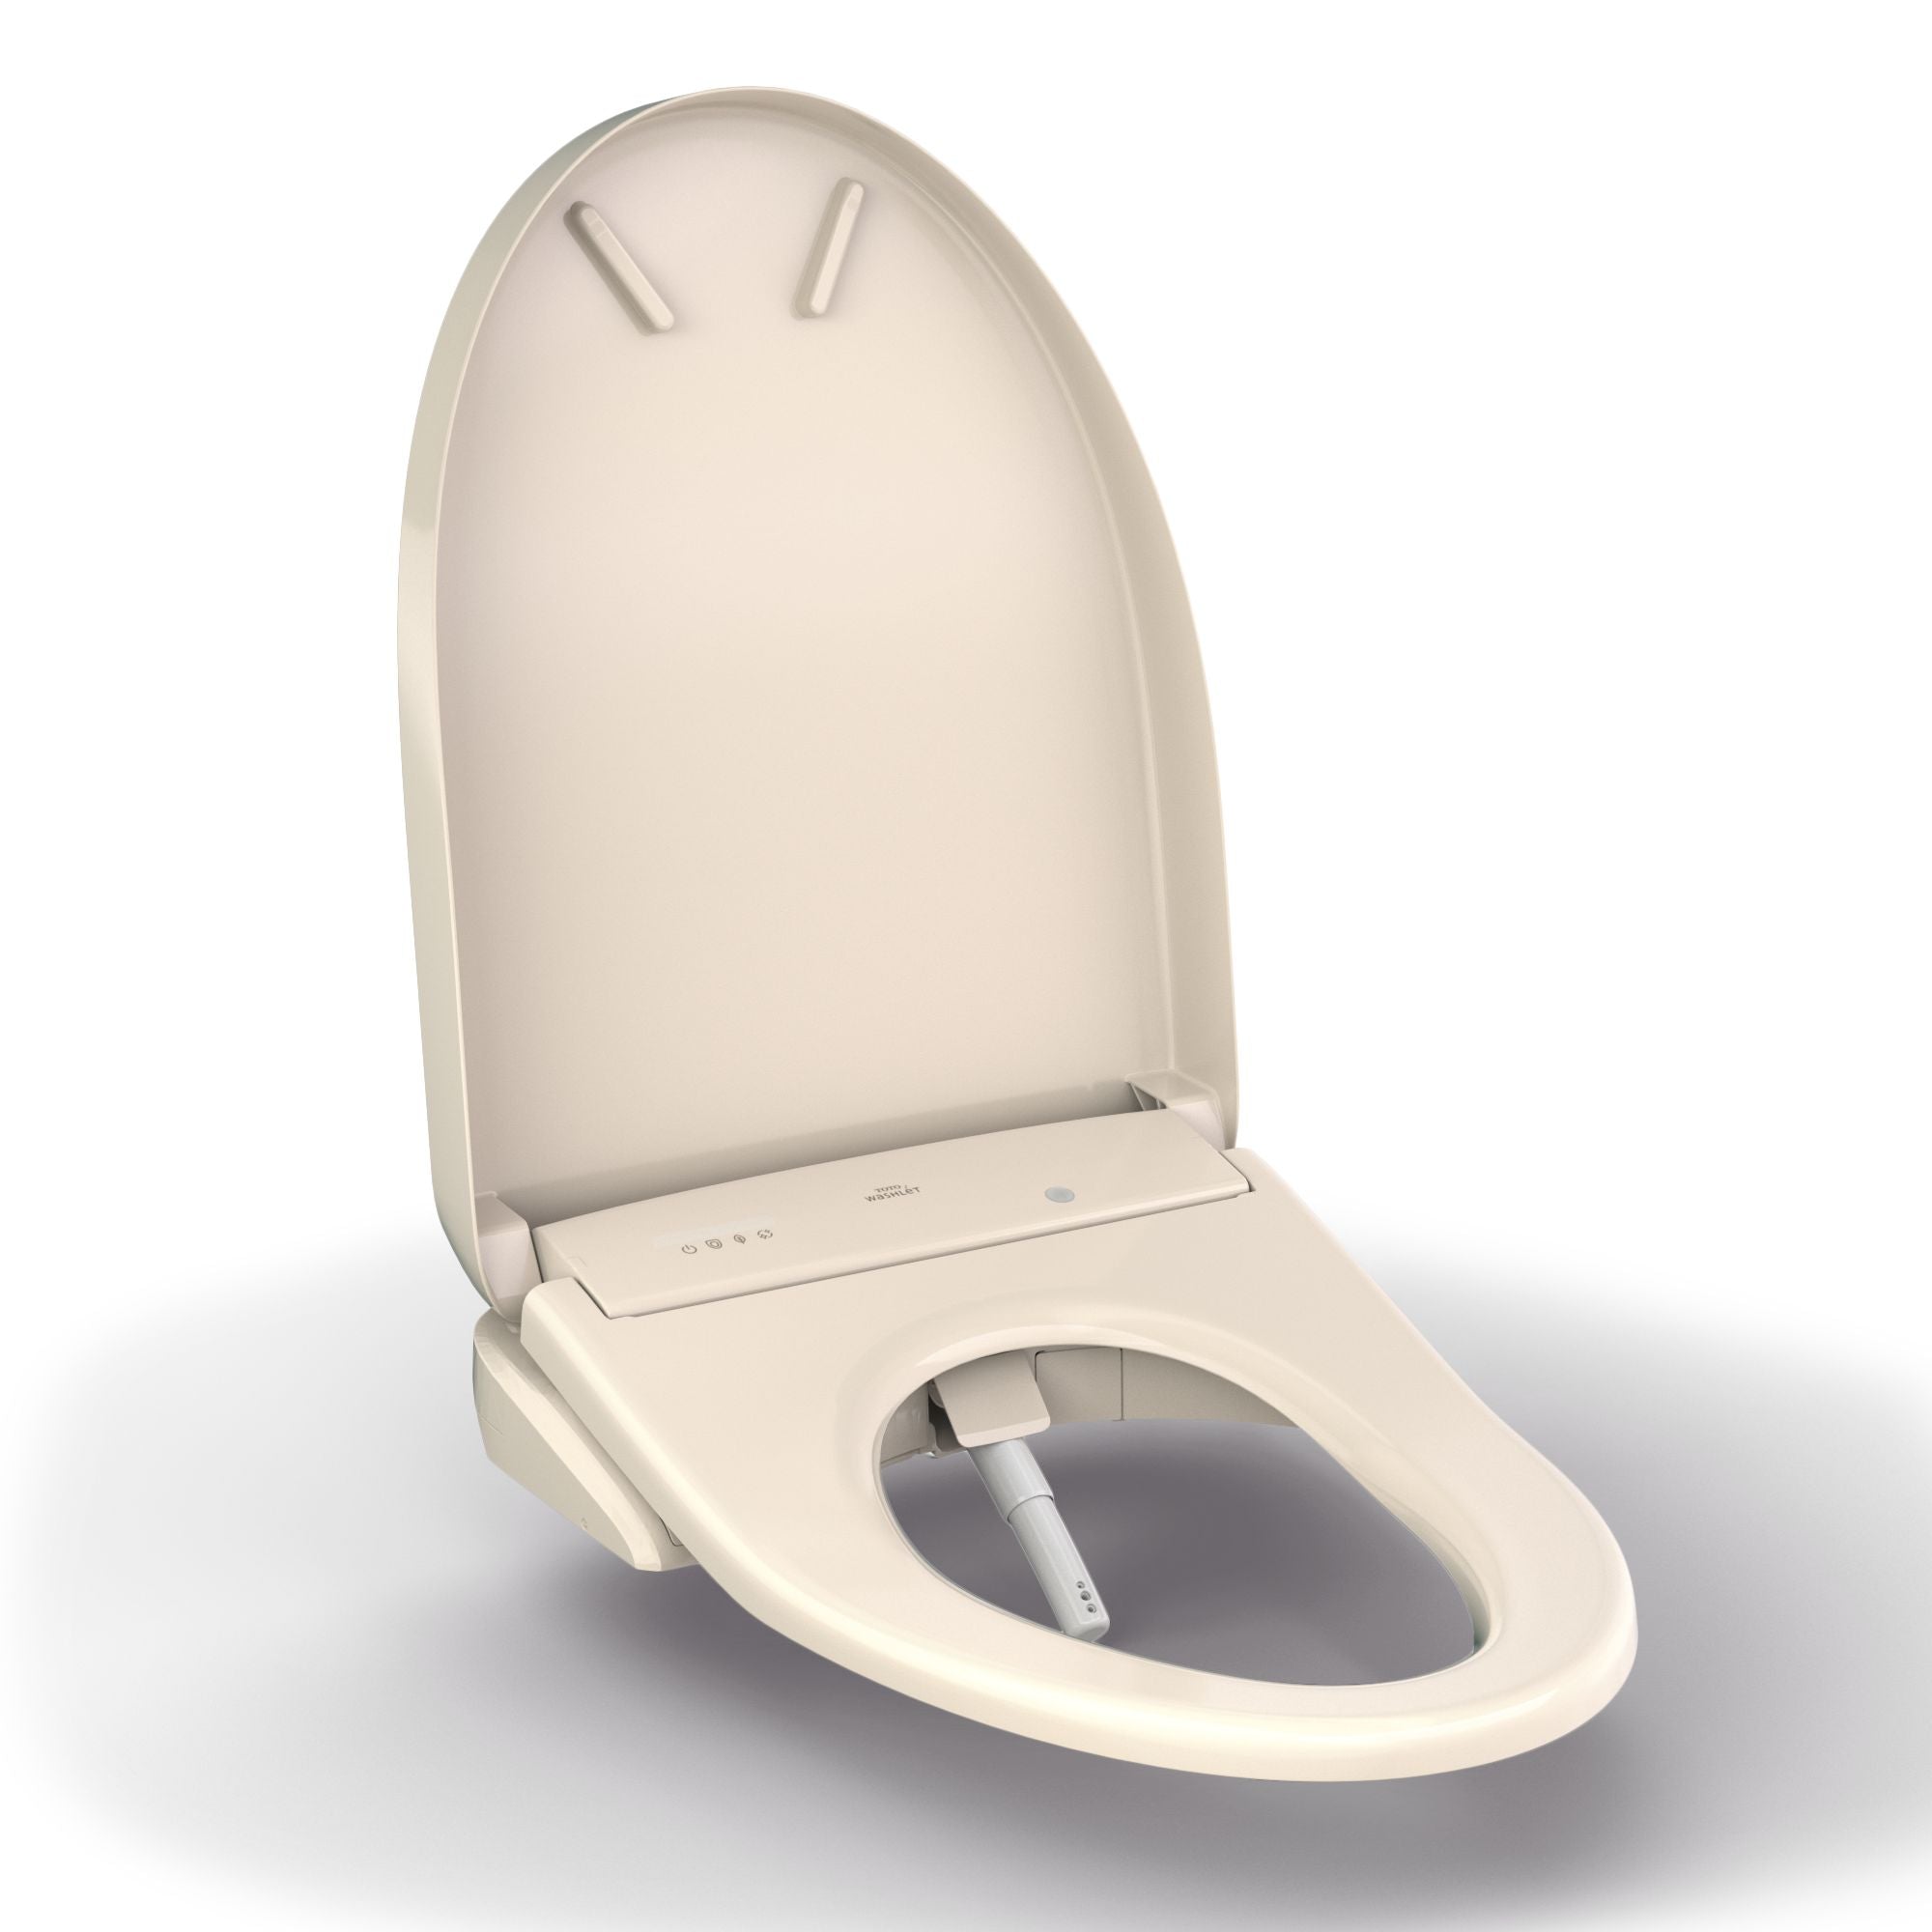 Toto S7A Electronic Bidet Toilet Seat, Classic Lid